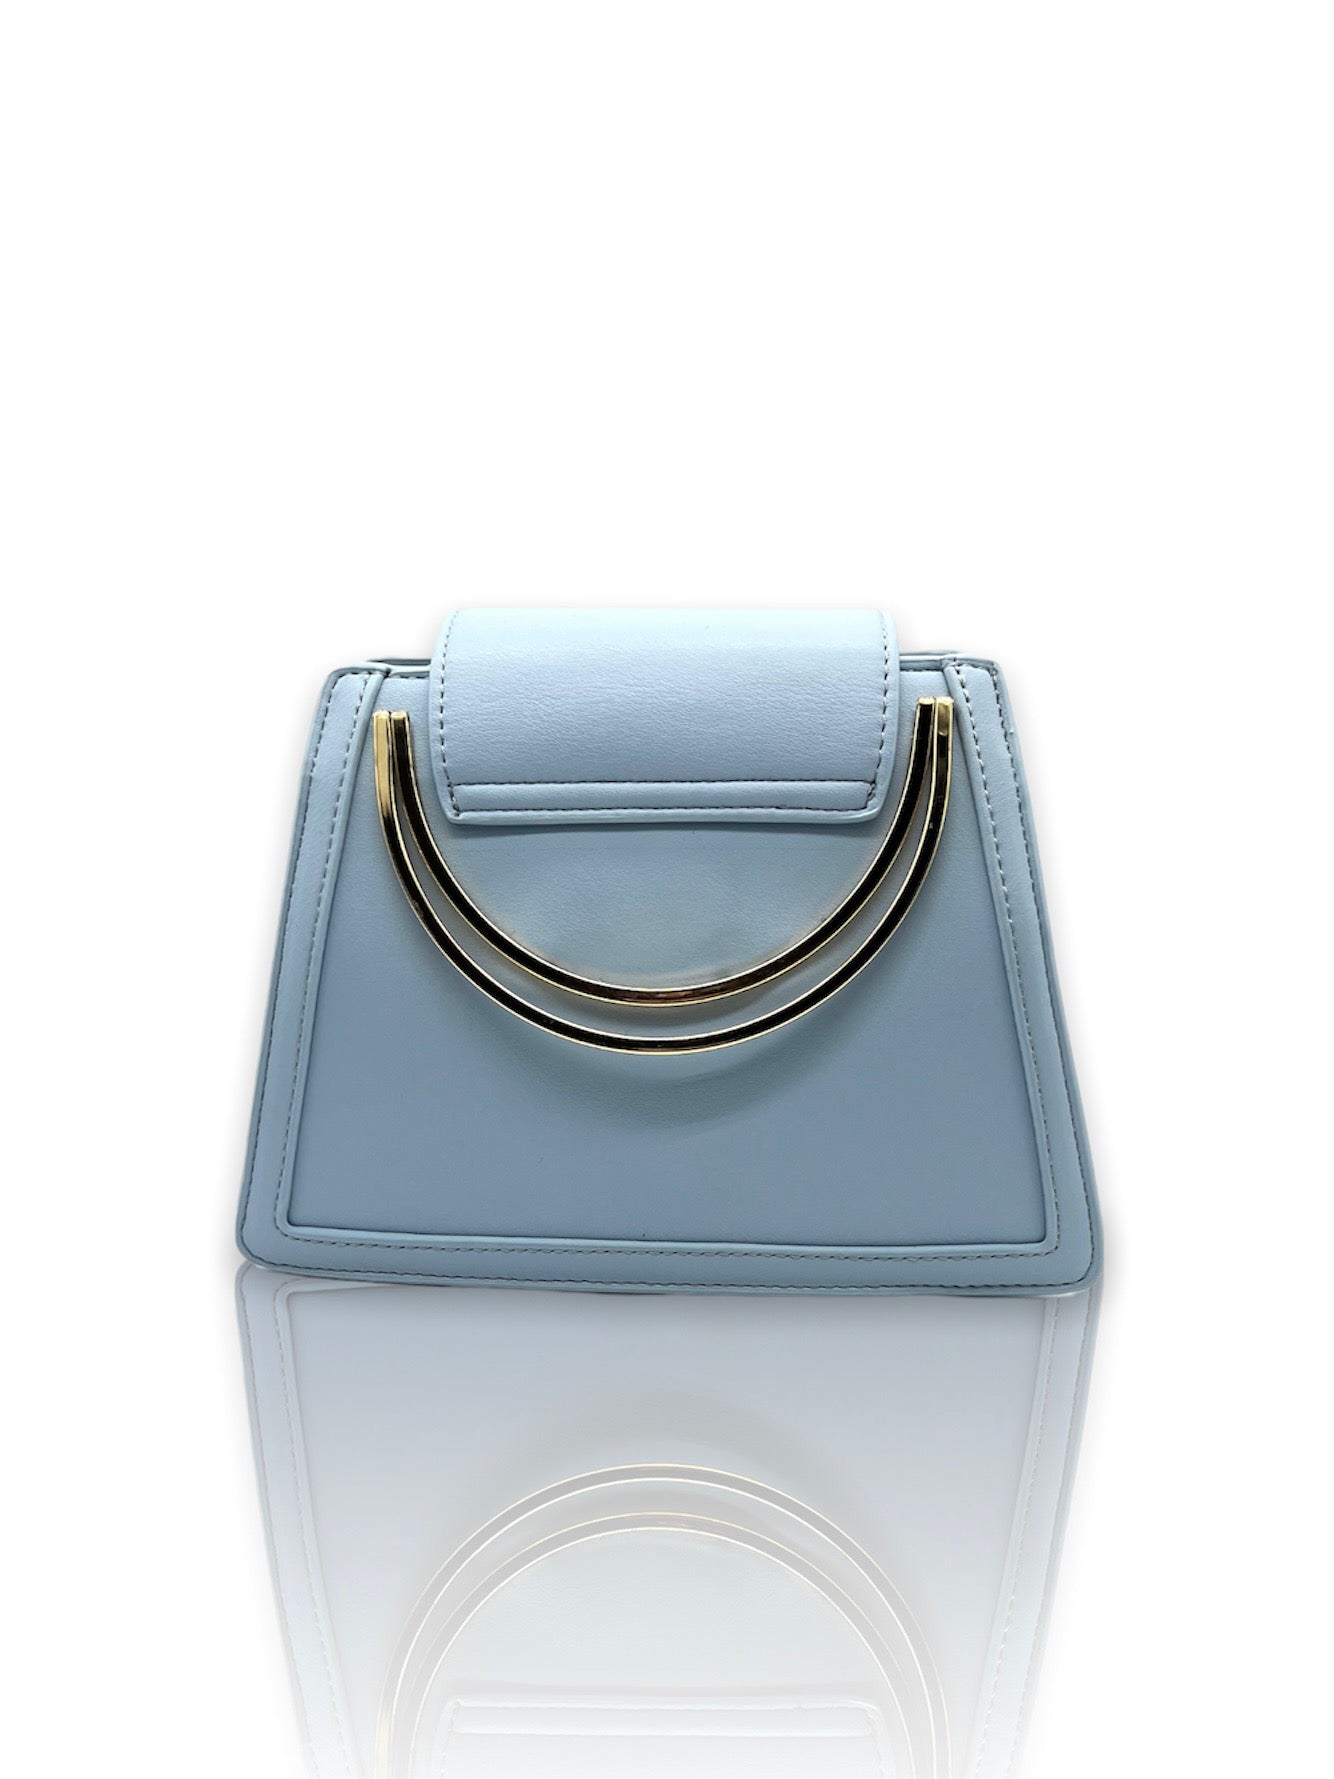 GISSELLE leather top handle bag - artic blue